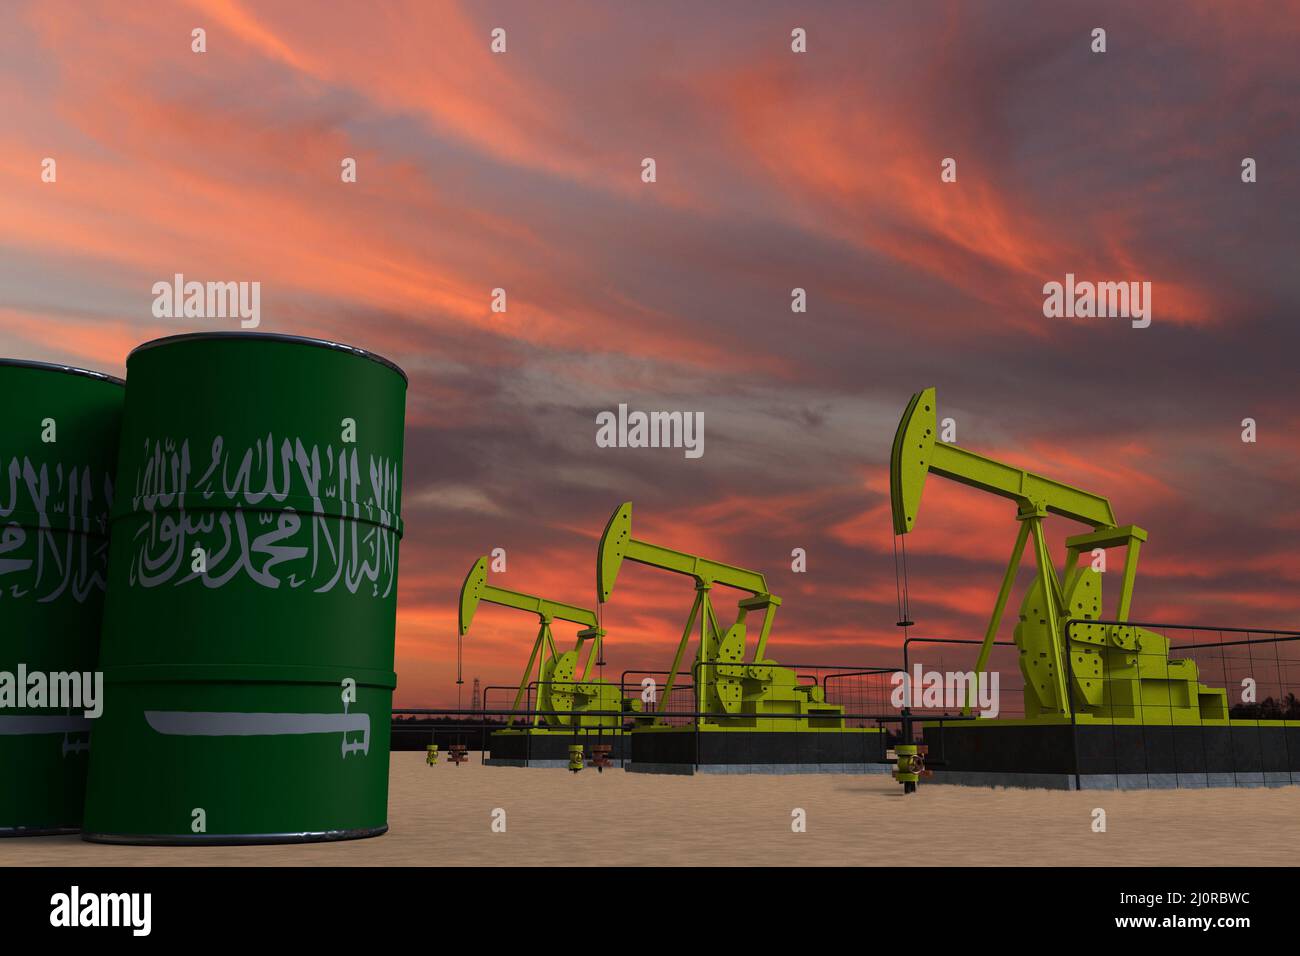 Nice pumpjack oil extraction and cloudy sky in sunset with the SAUDI ARABIA flag on oil barrels 3D rendering Stock Photo